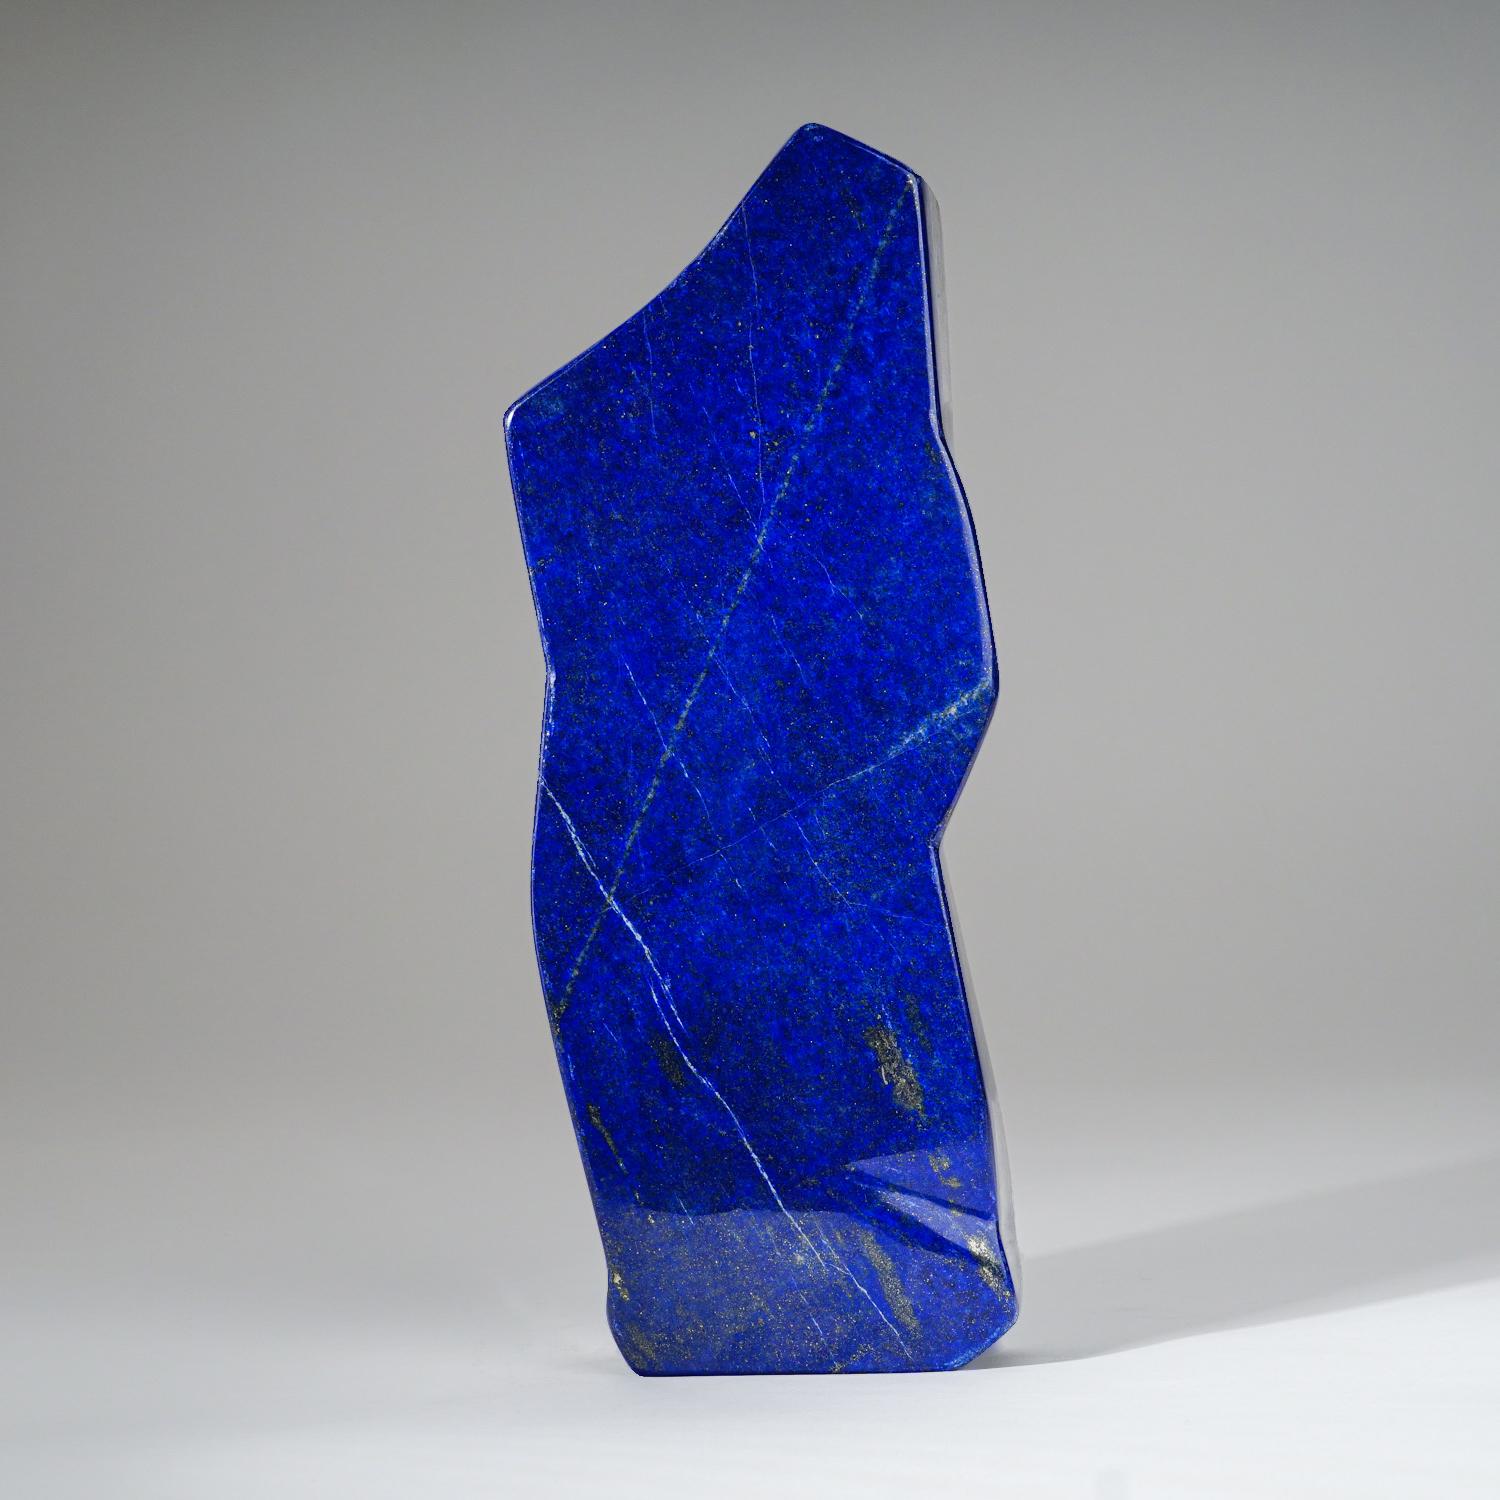 Beautiful hand-polished free form of AAA quality natural Afghani lapis lazuli. This specimen has rich, electric-royal blue color enriched with scintillating pyrite microcrystals.

Lapis Lazuli is a powerful crystal for activating the higher mind